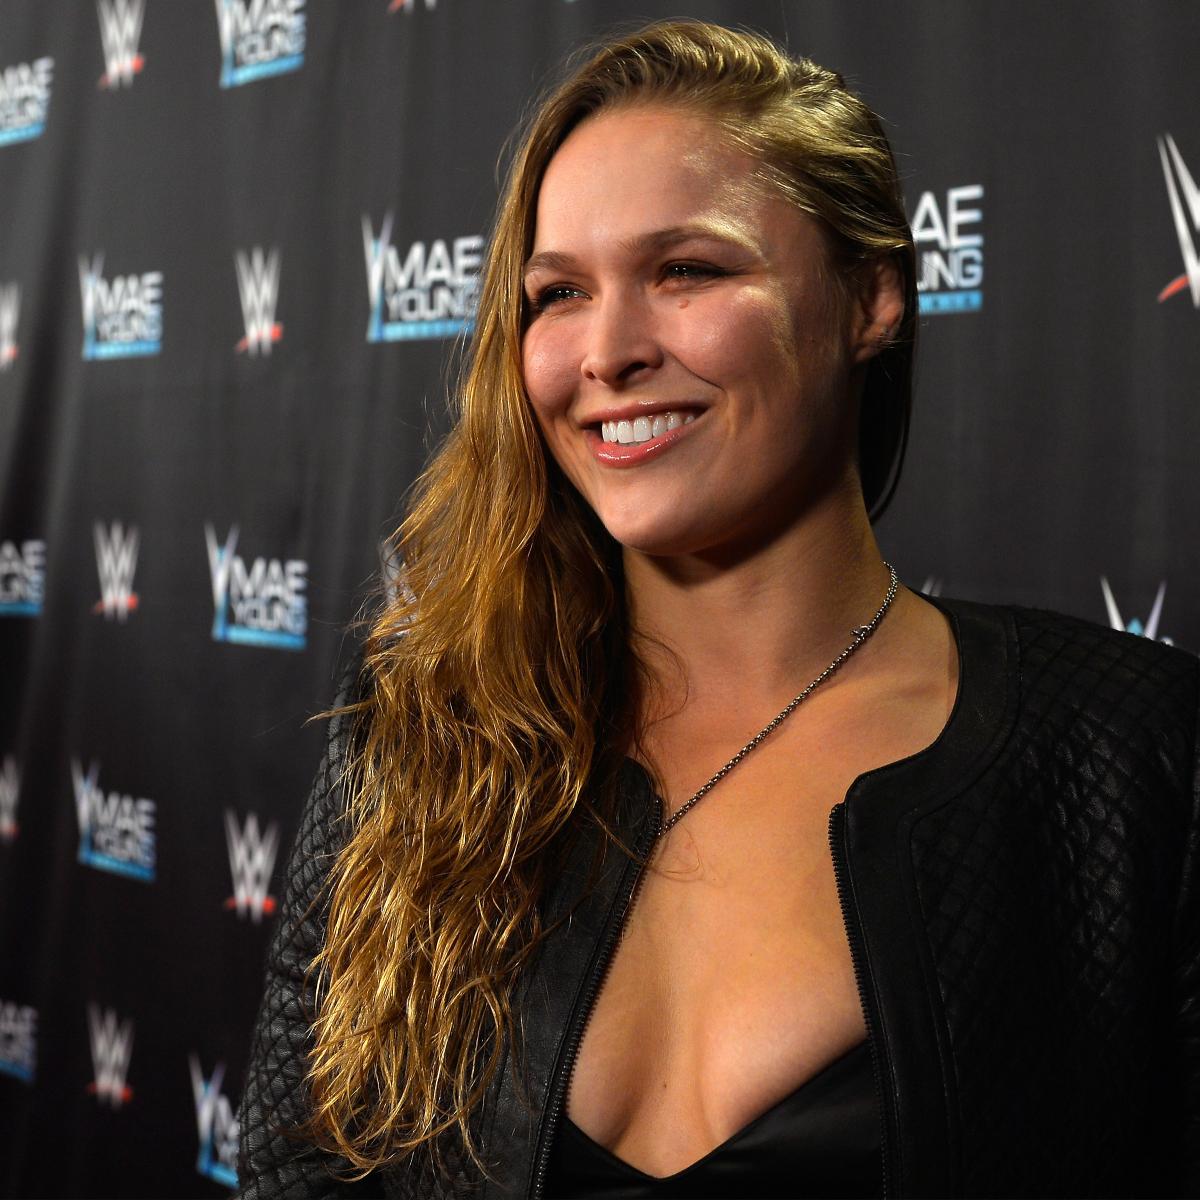 Lynch becomes first women to top ESPN's WWE Power Rankings 